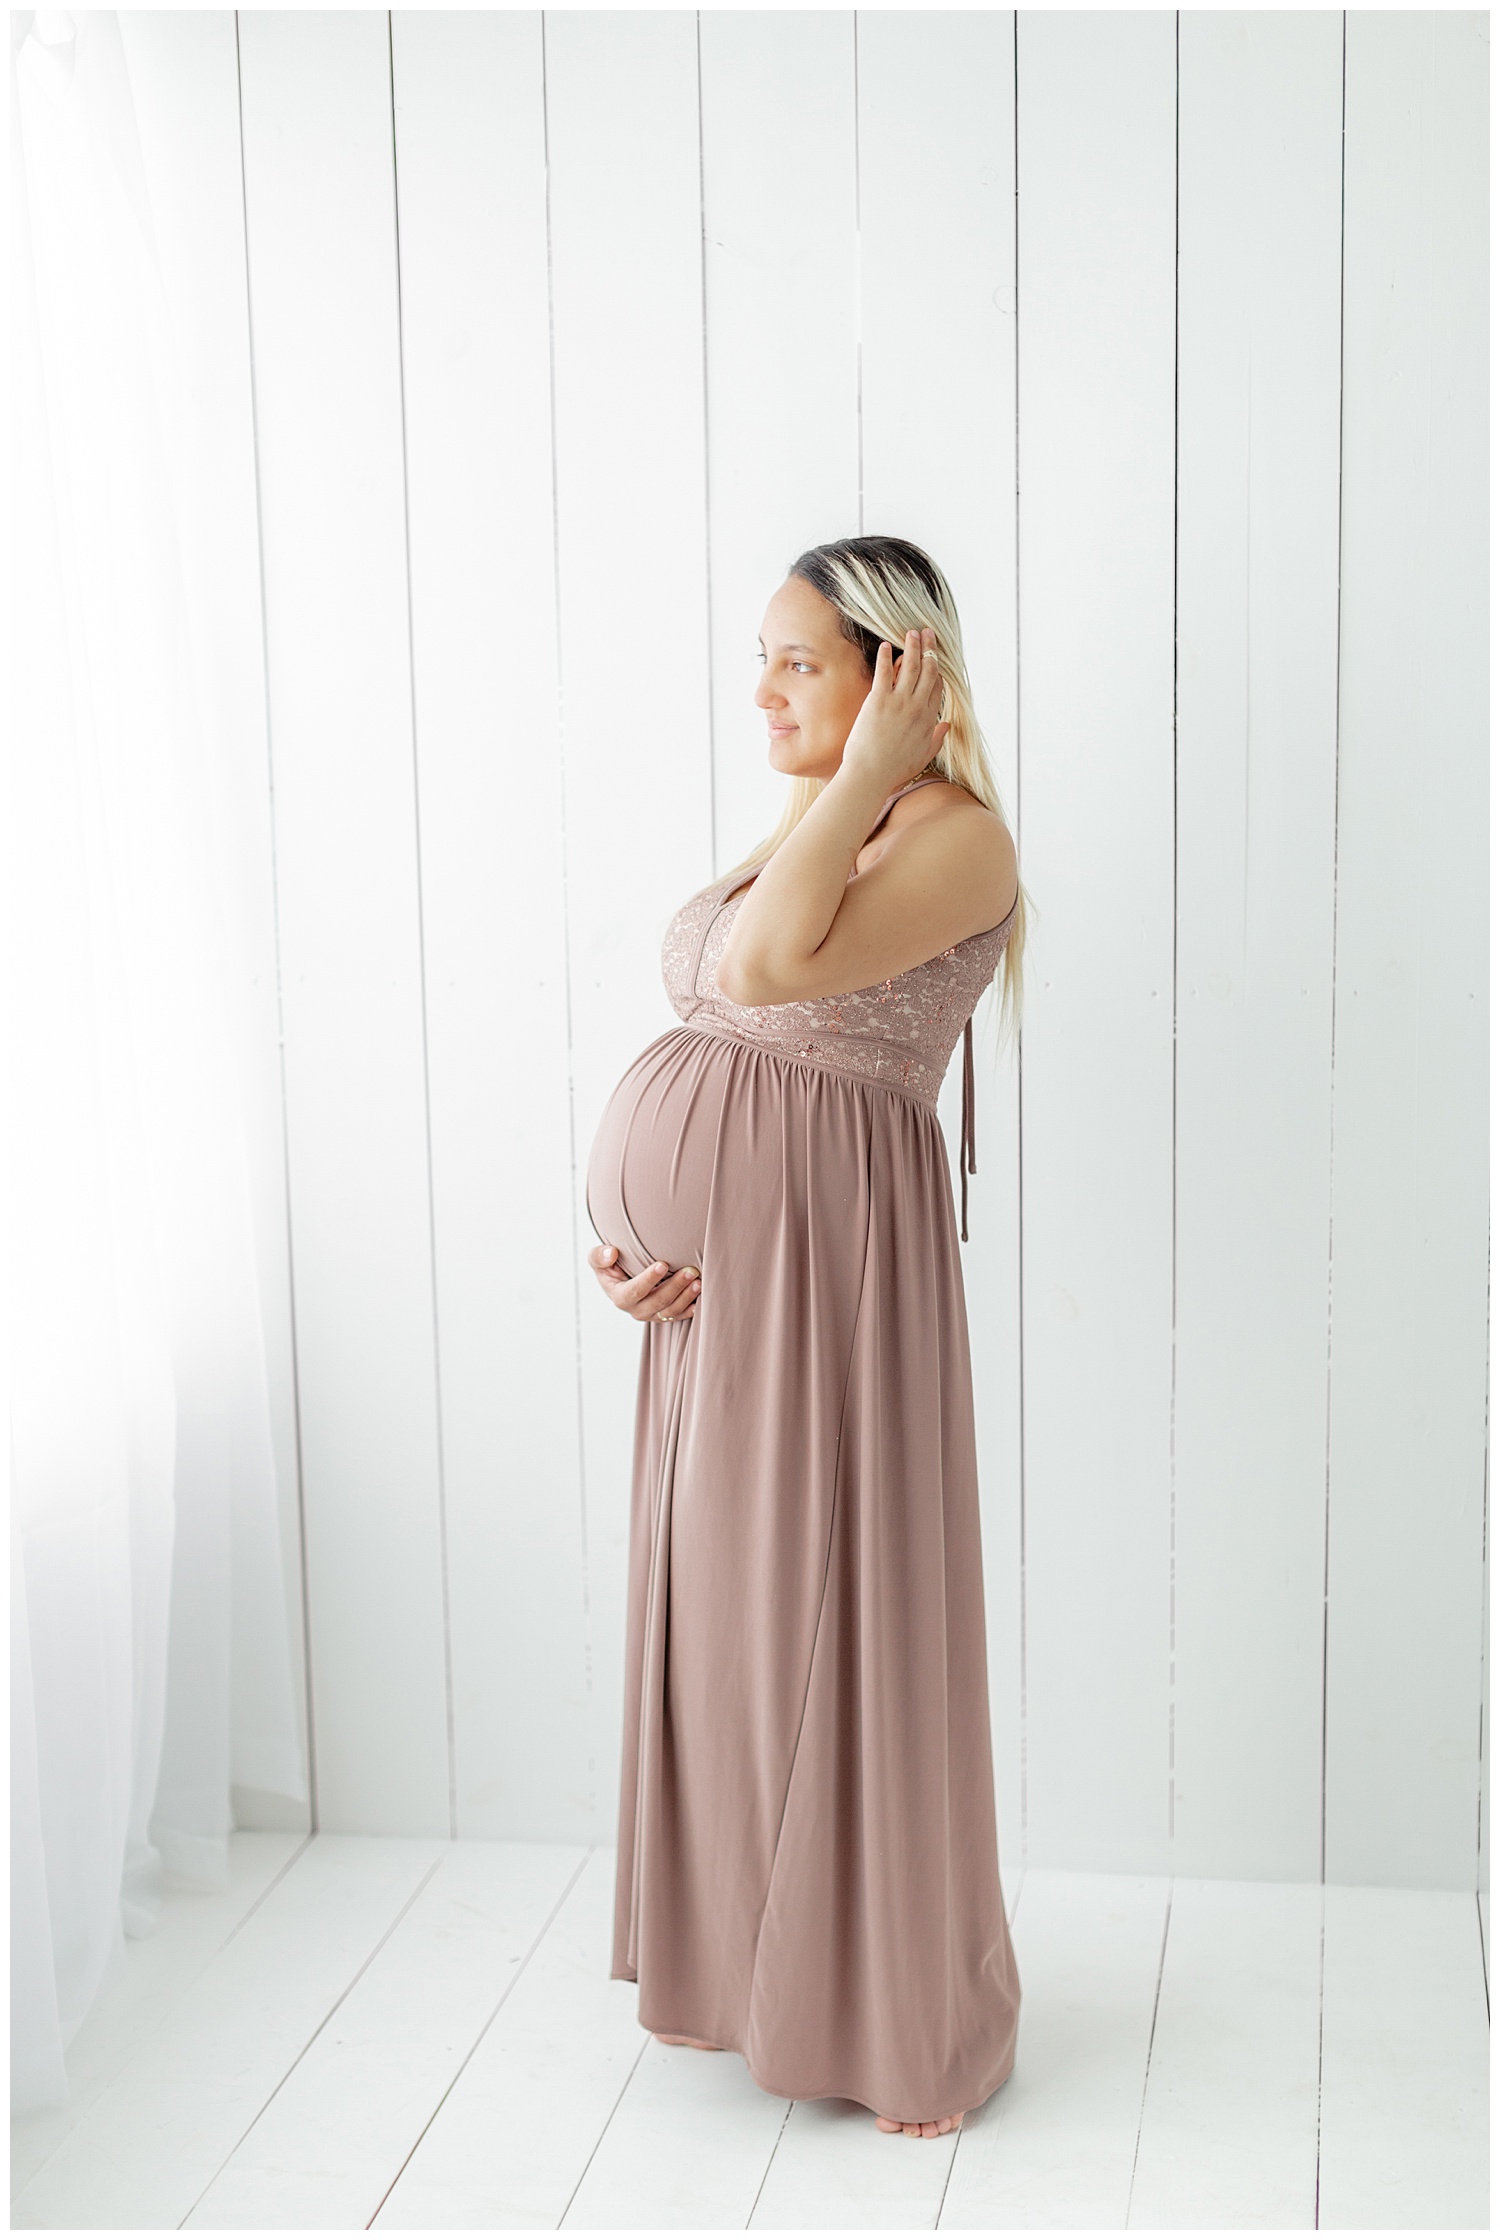 Karen patiently waits for the arrival of her baby girl while standing in a white wood room wearing a blush maxi dress and holding her baby bump | CB Studio